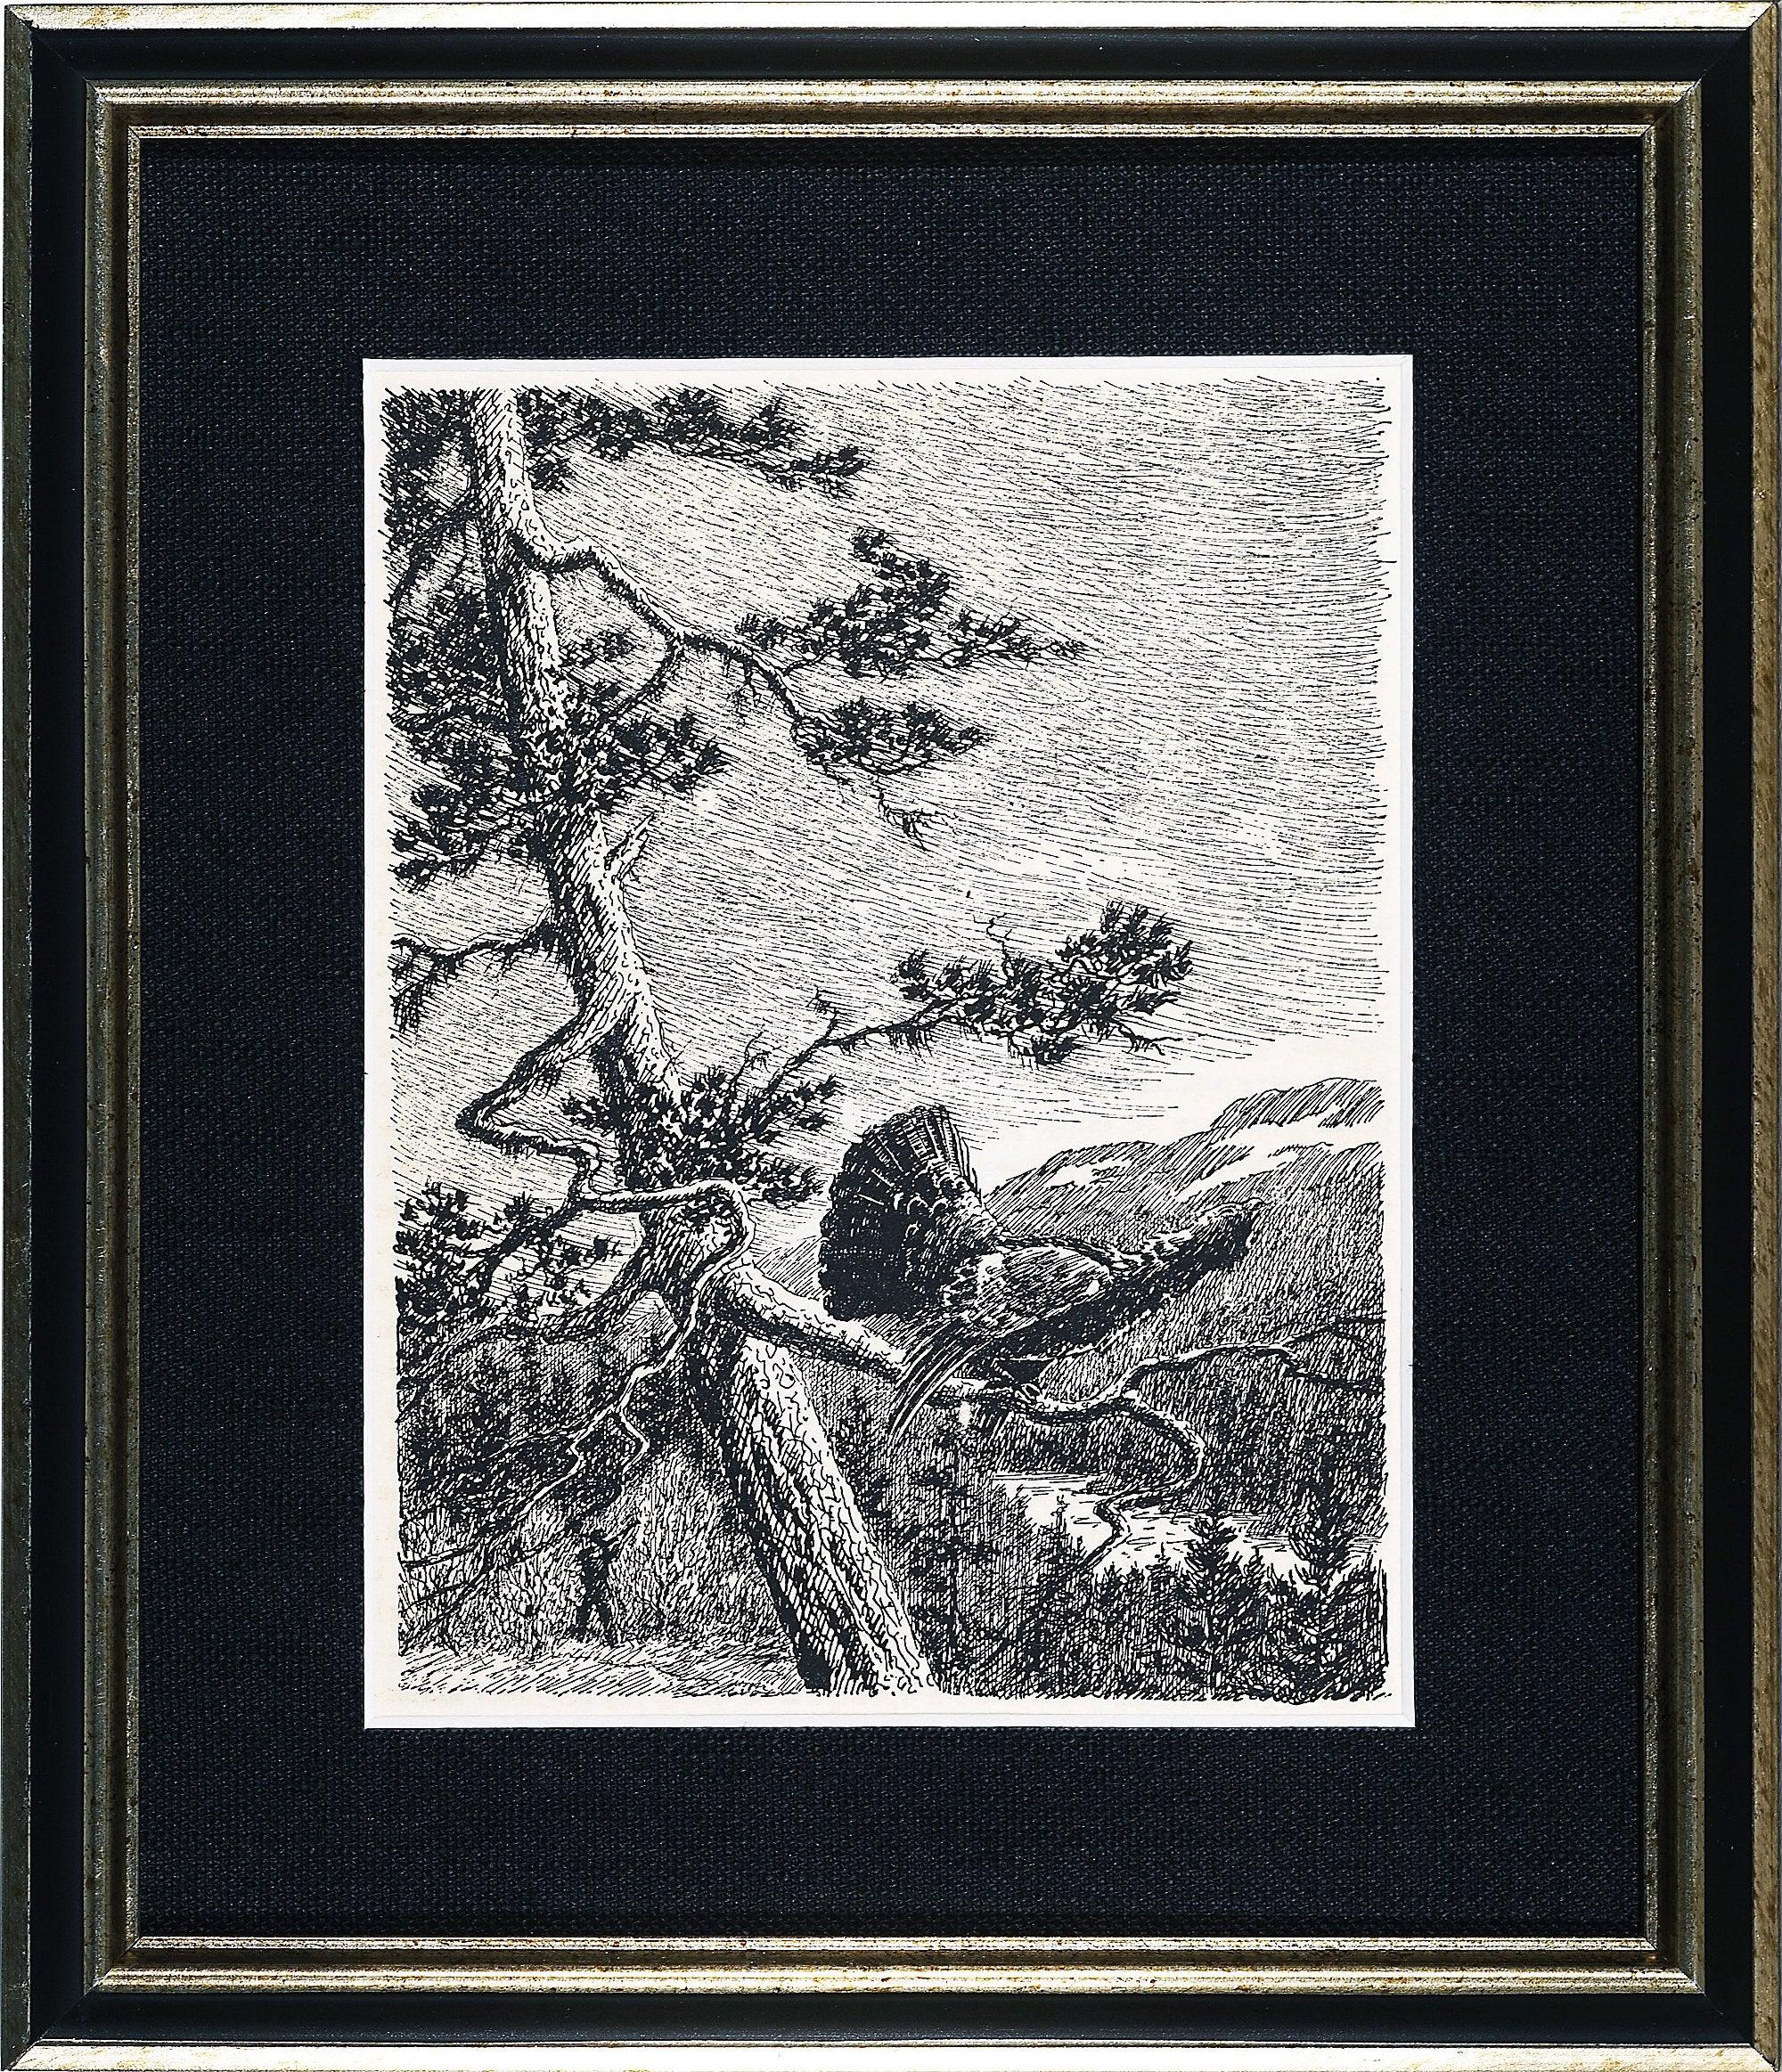 The Perfect Fishing Spot and Wild Turkey on a Branch - Black Landscape Print by Unknown